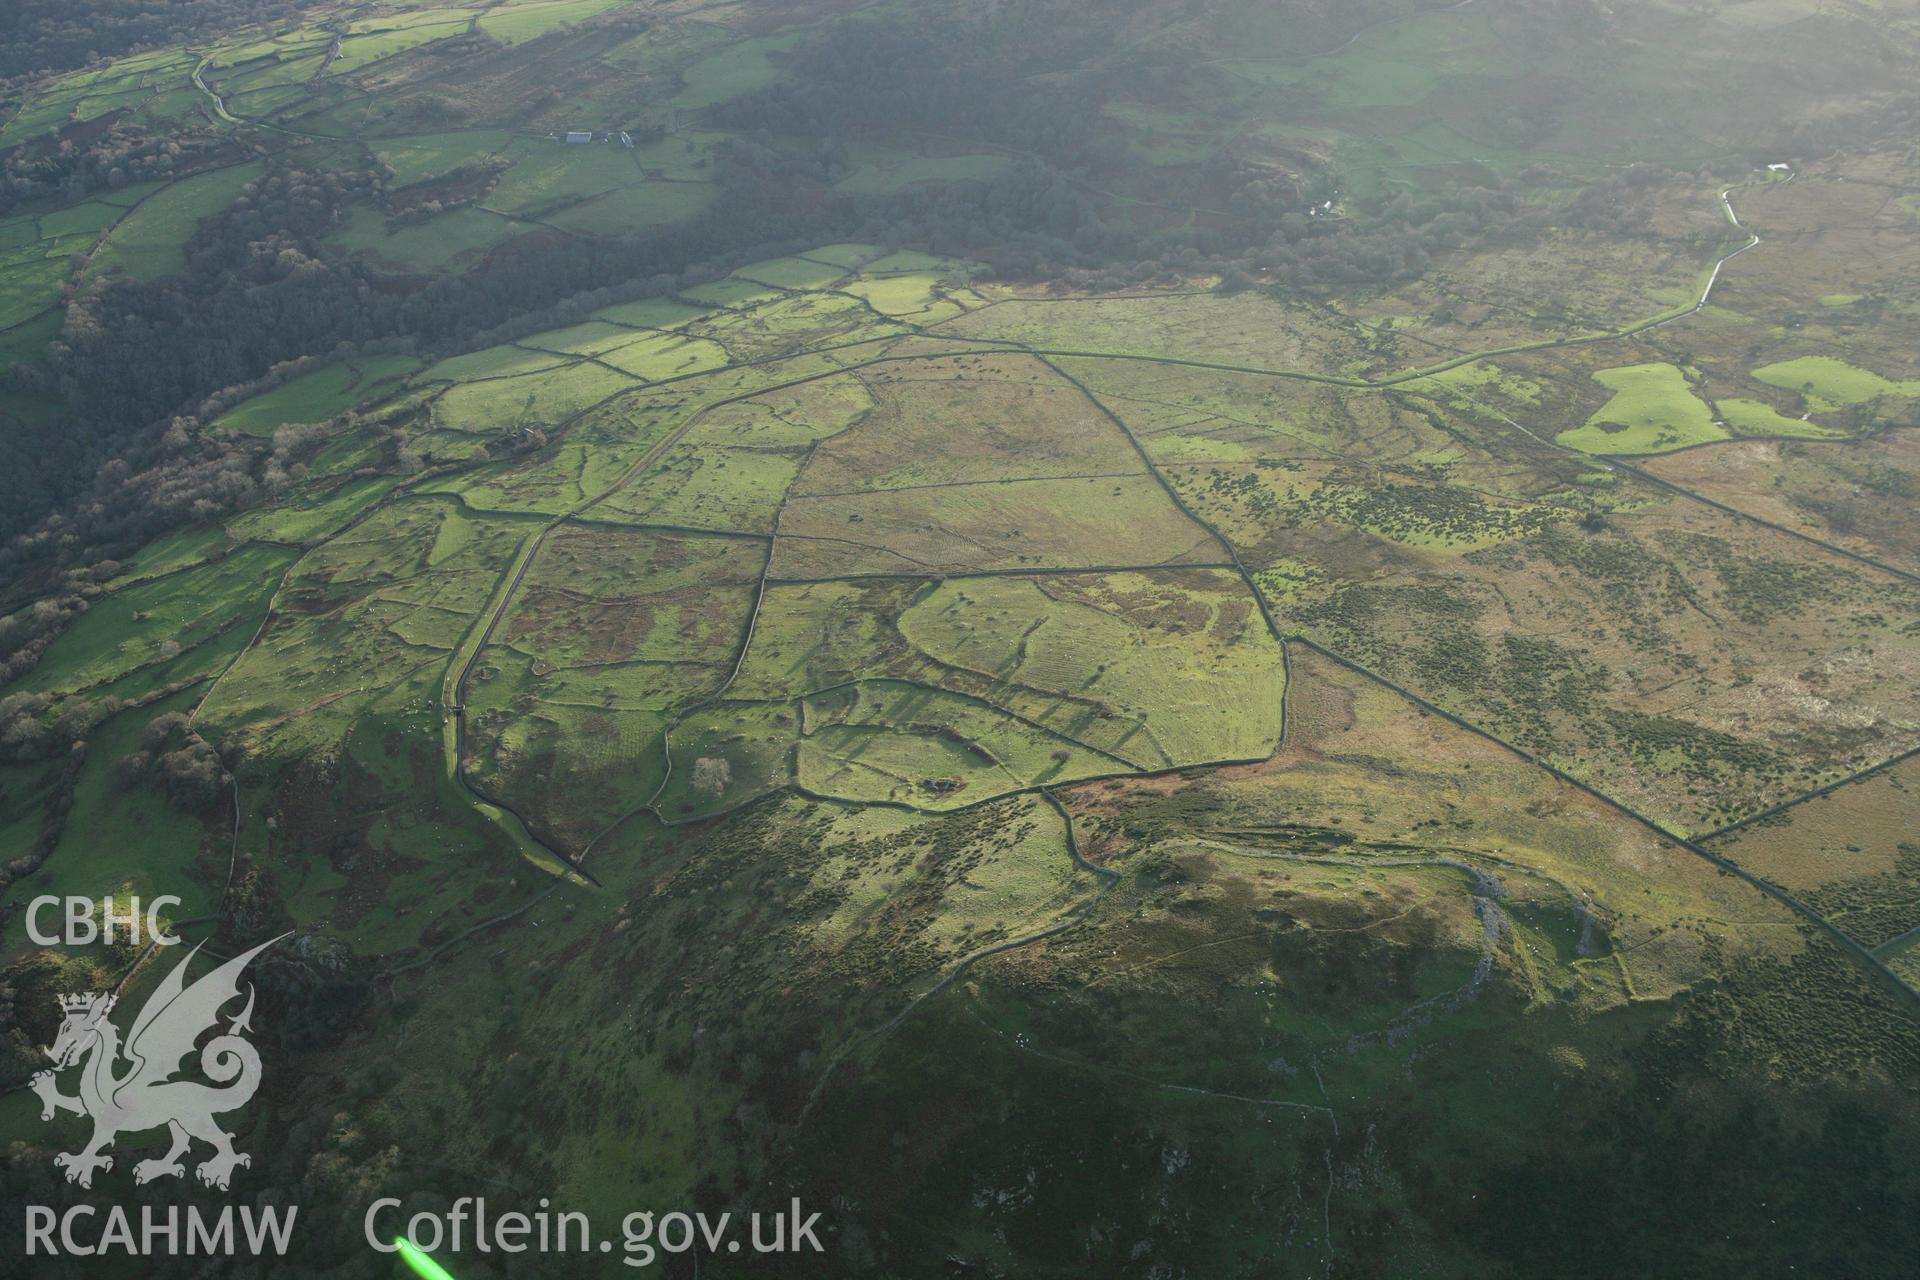 RCAHMW colour oblique aerial photograph of Pen-y-Gaer Hillfort. Taken on 10 December 2009 by Toby Driver